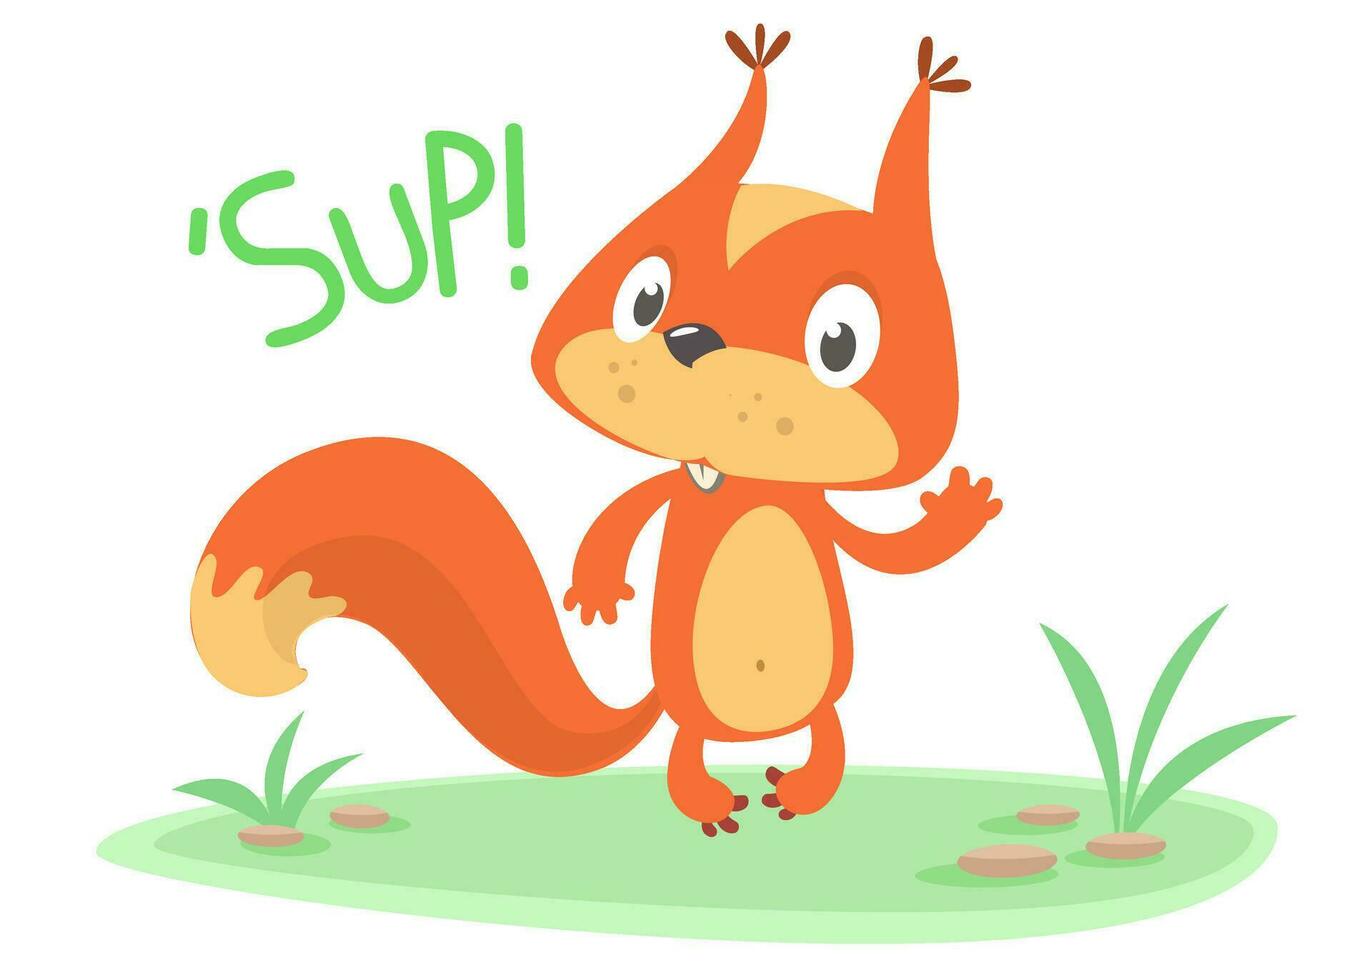 Cute cartoon jumping squirrel in playful mood. Vector illustration isolated